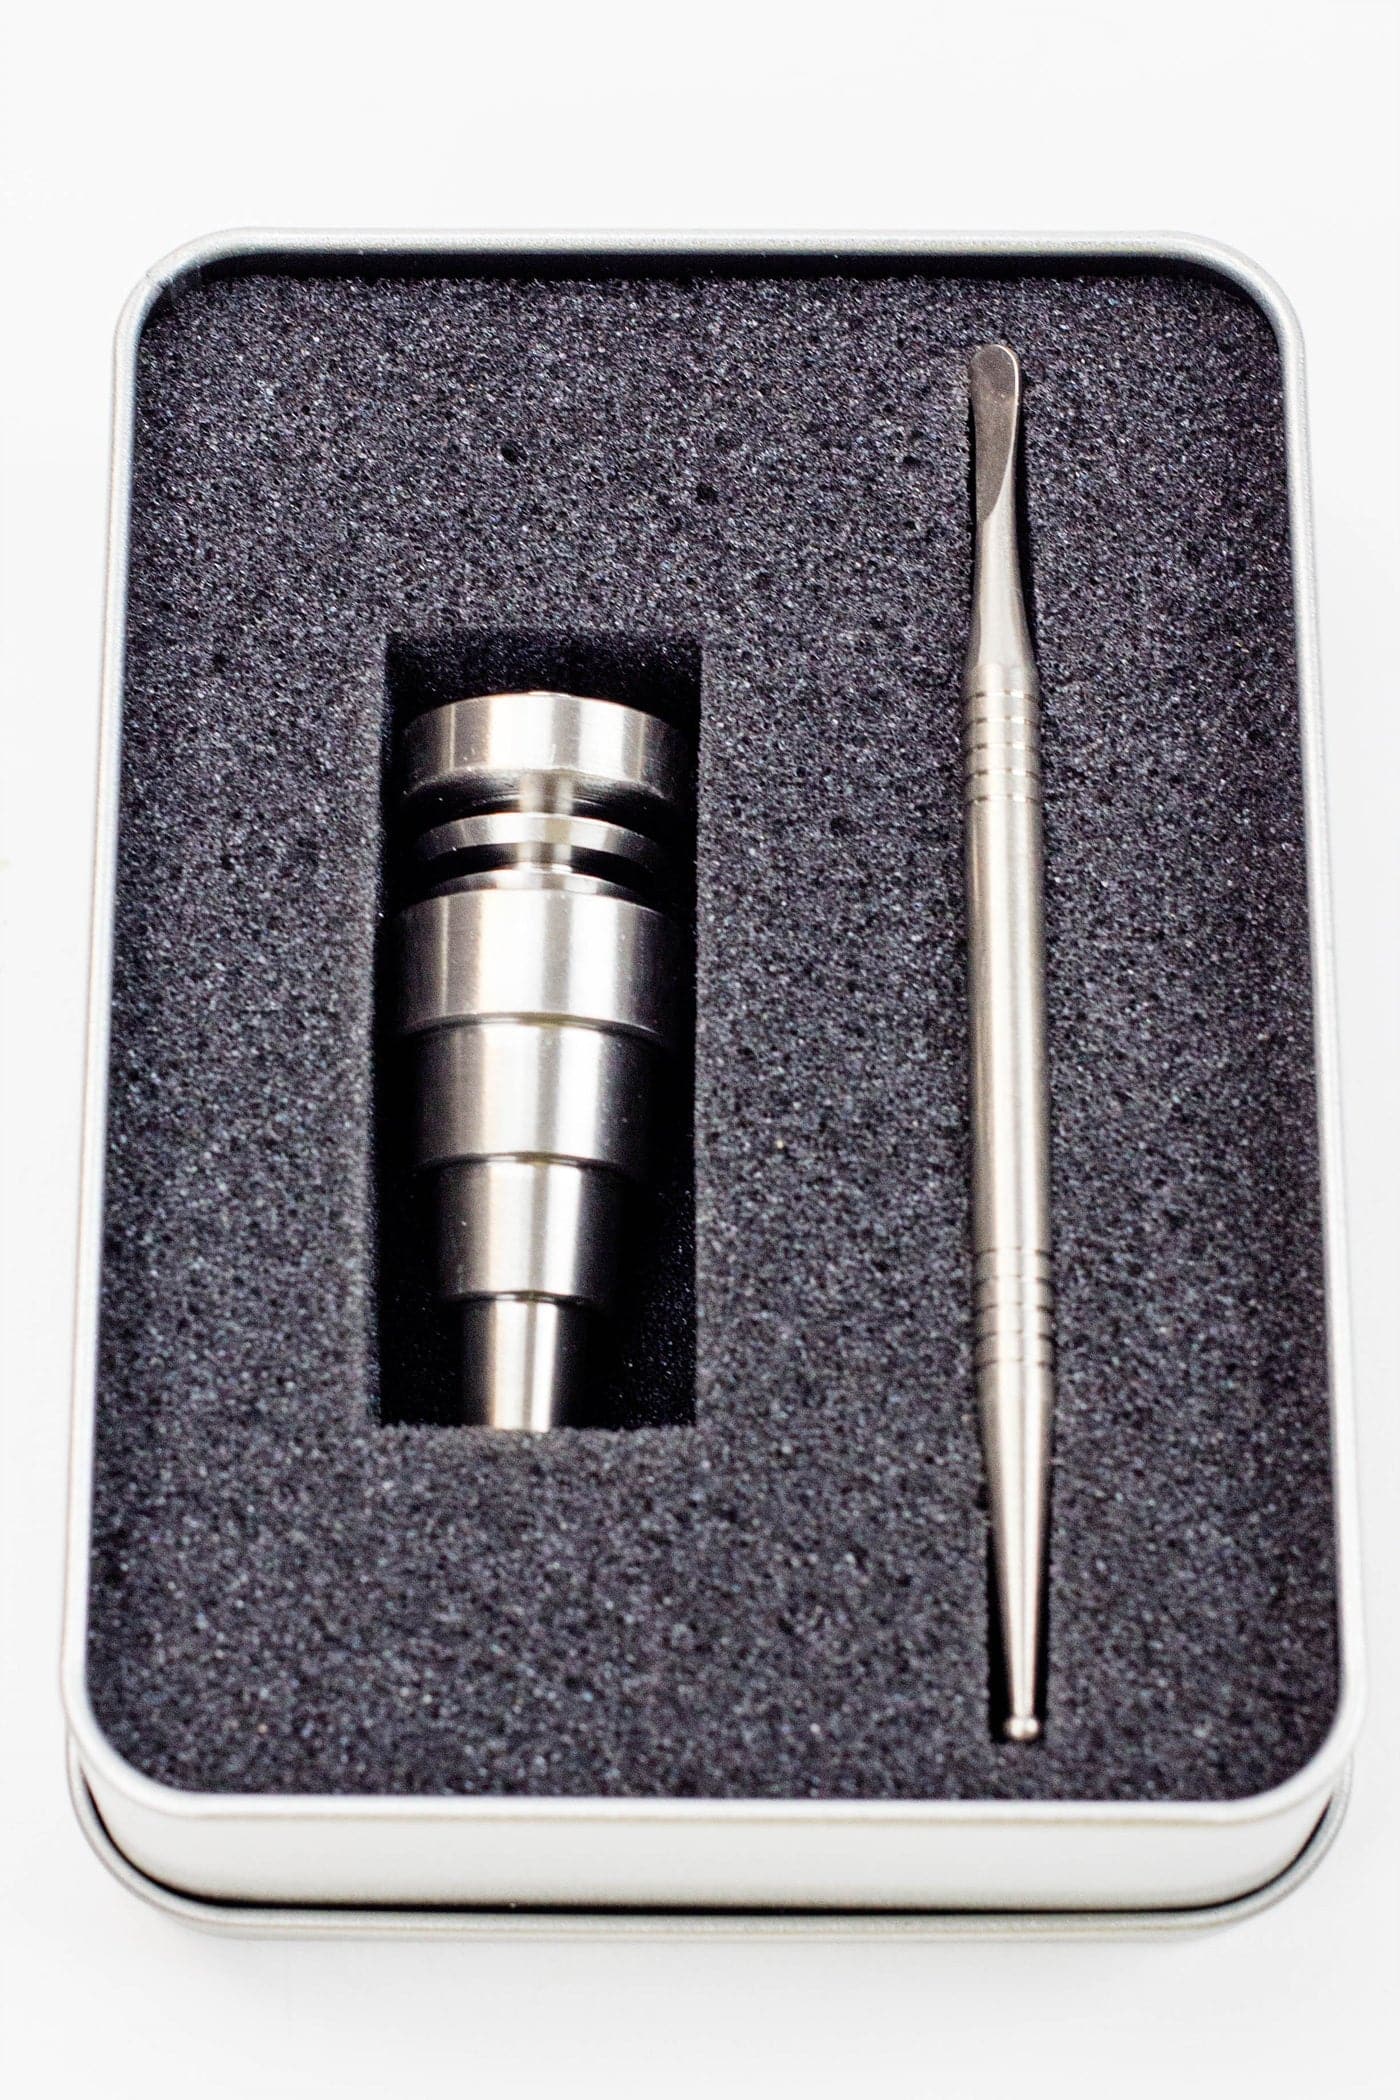 Titanium domeless nail and dabber set 6-in-1_7